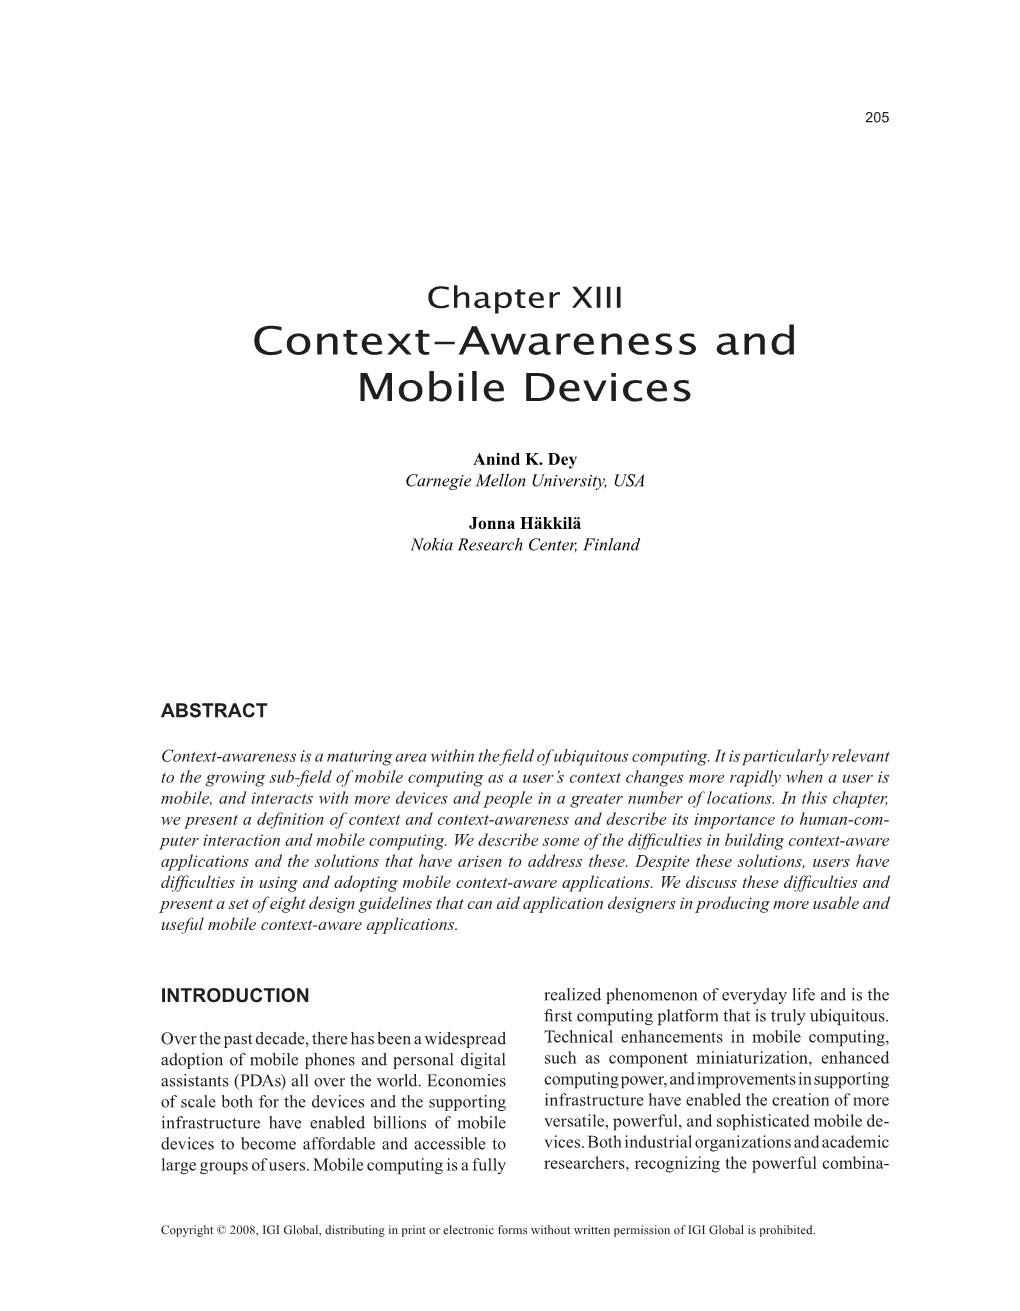 Context-Awareness and Mobile Devices